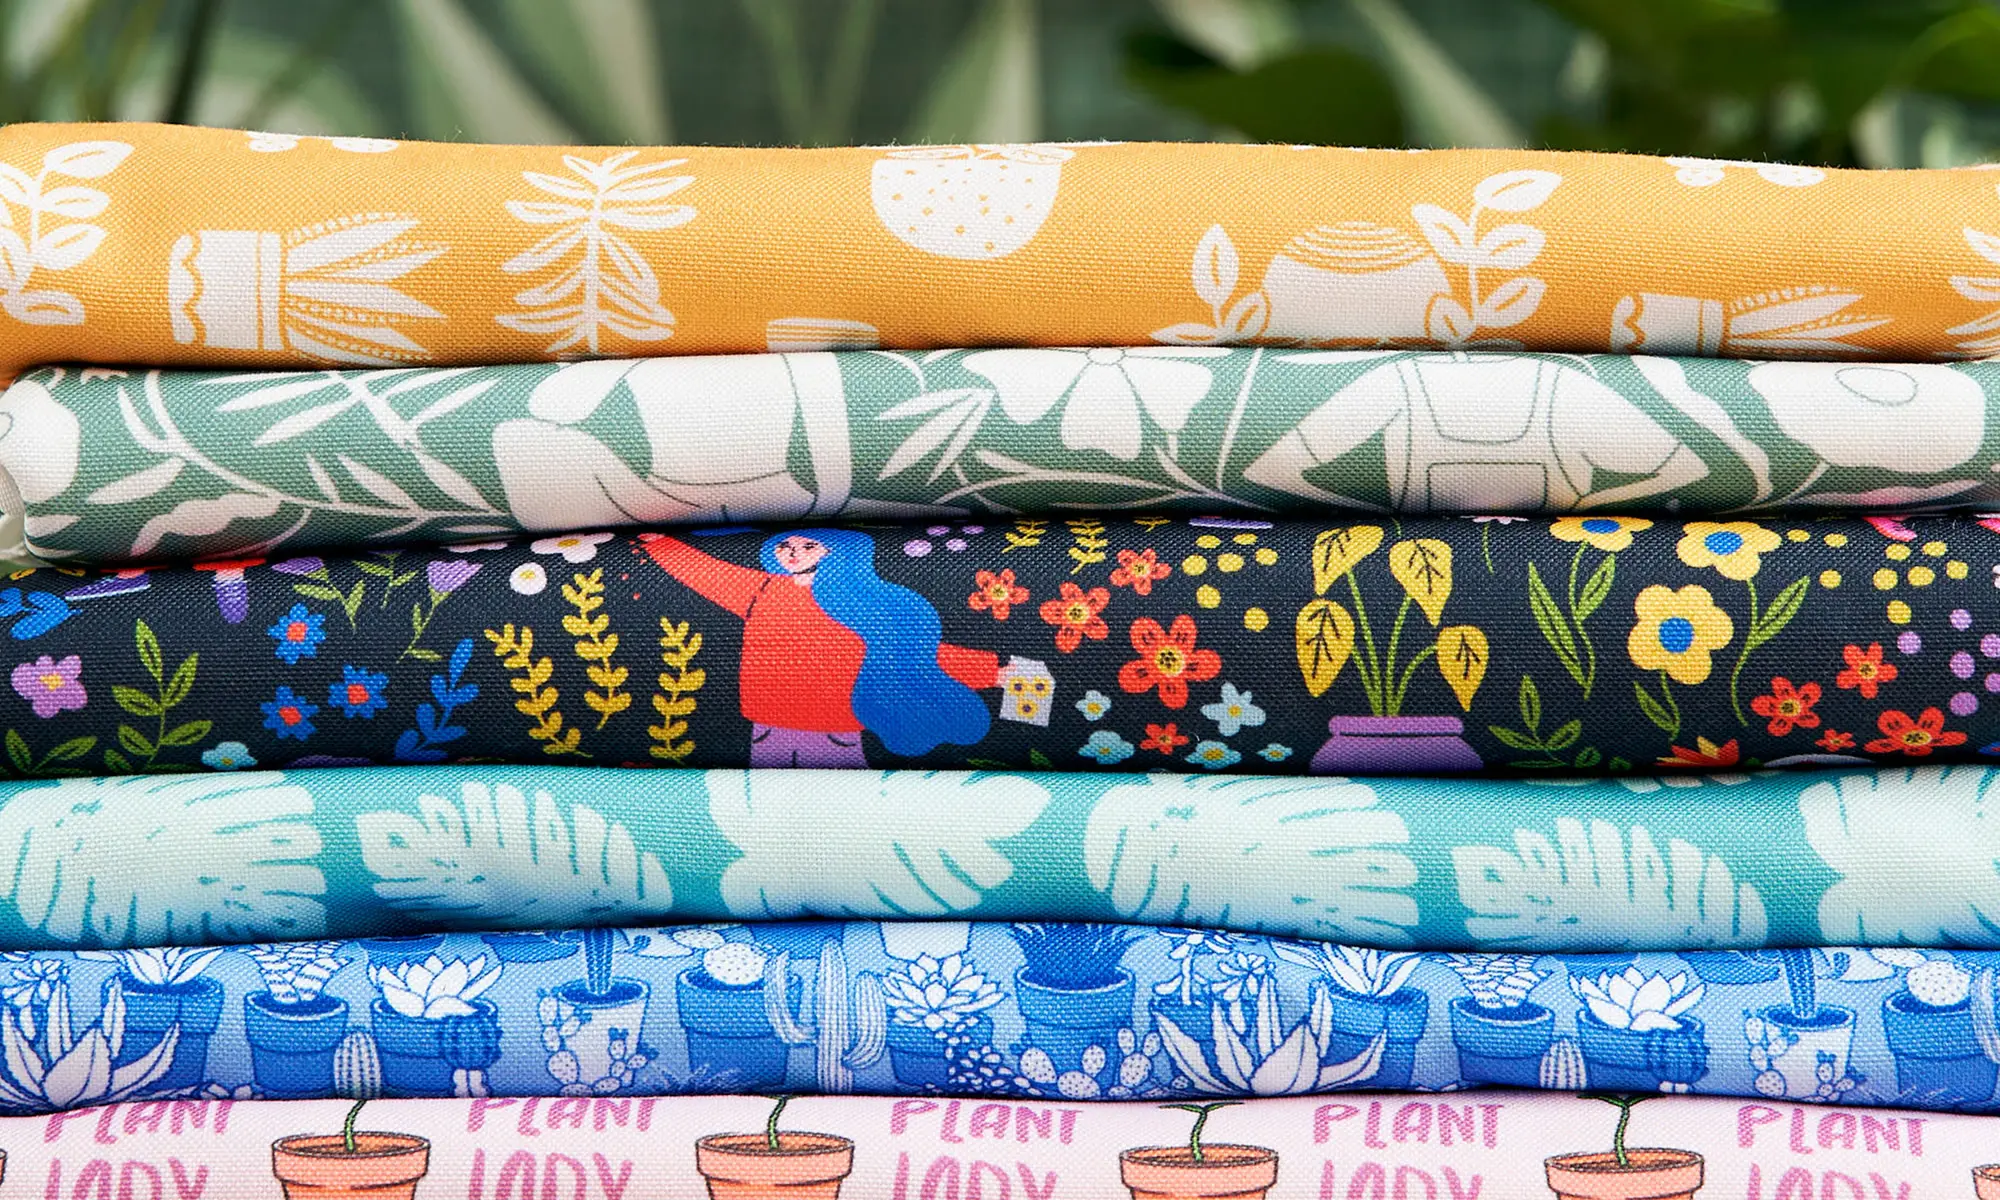 Stack of plant inspired fabrics.